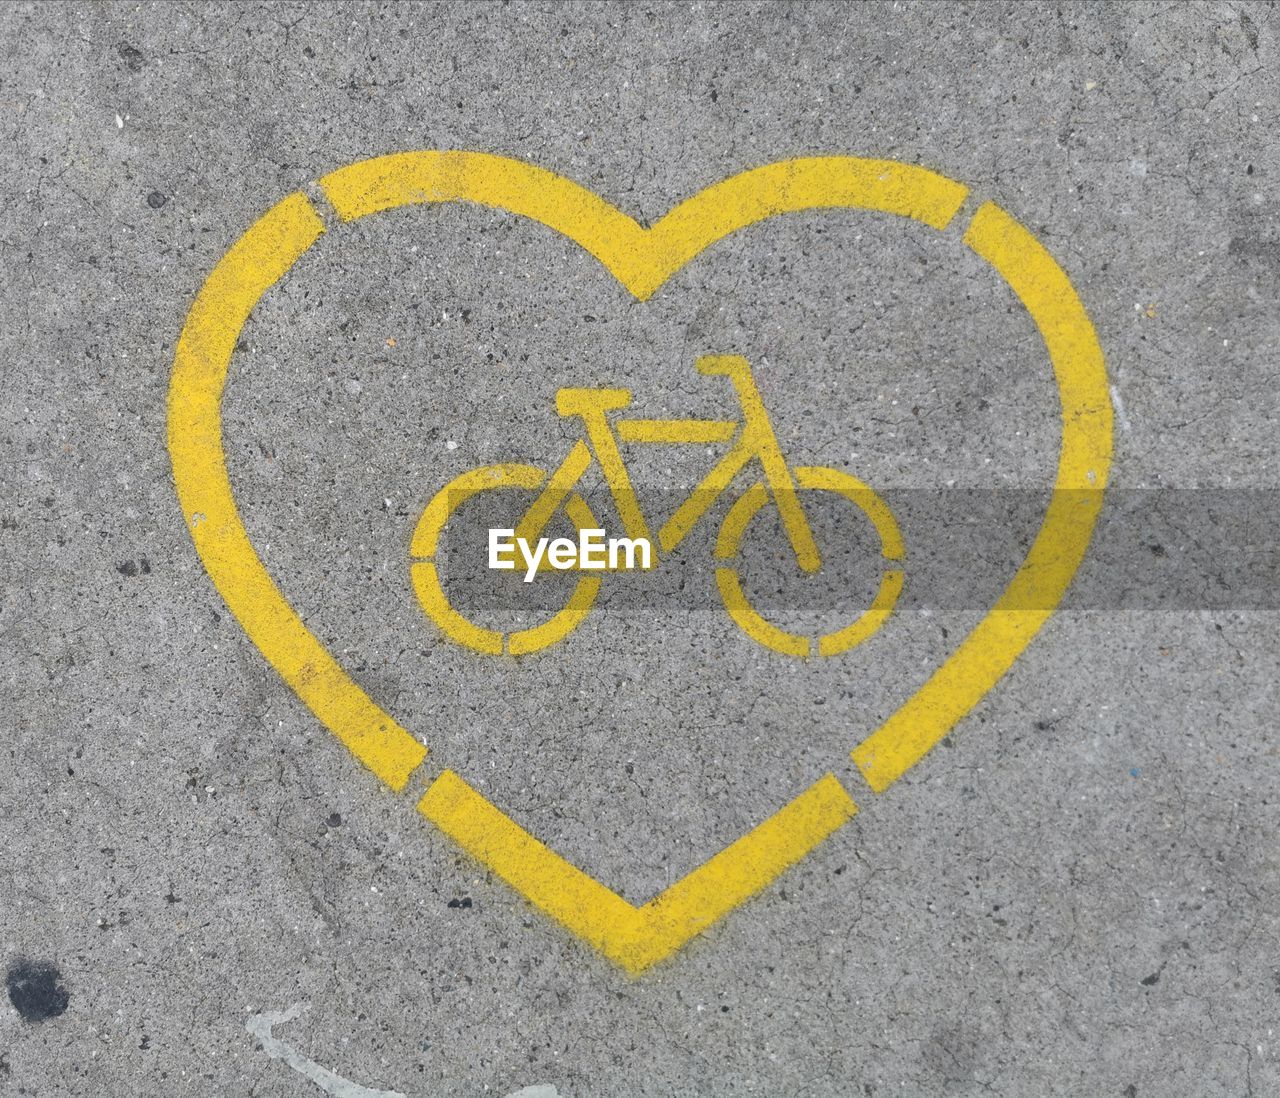 Directly above shot of yellow heart shape with bicycle lane marking on road